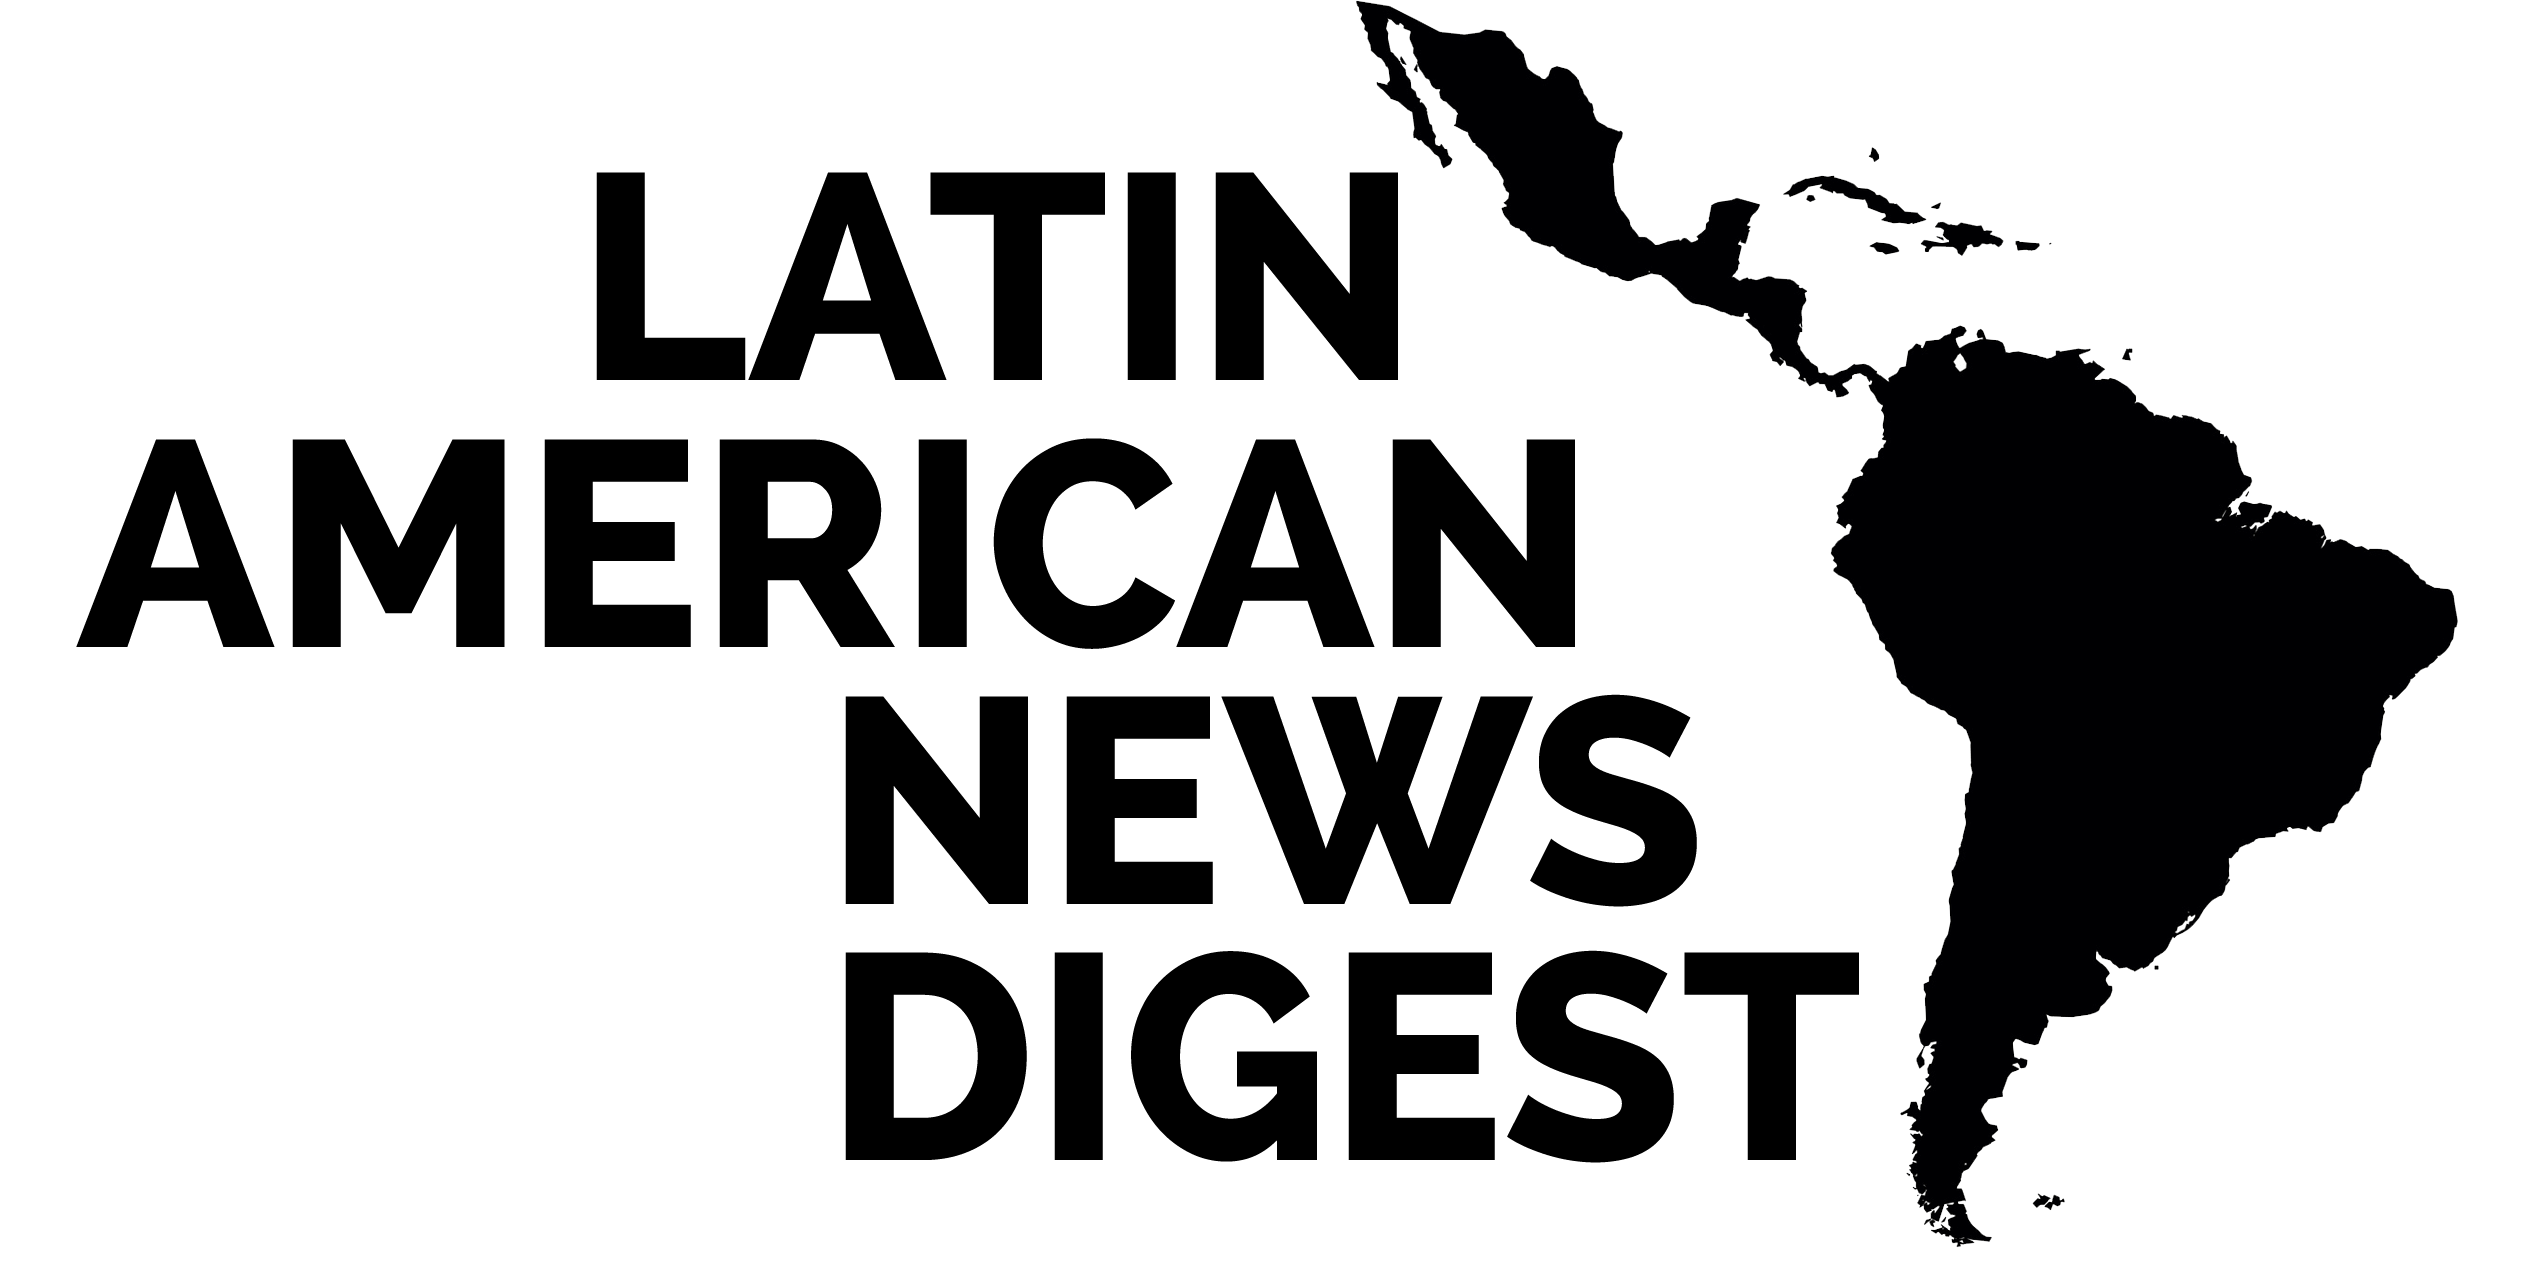 Latin America Logo - Latin American News Digest coverage and analysis from Latin